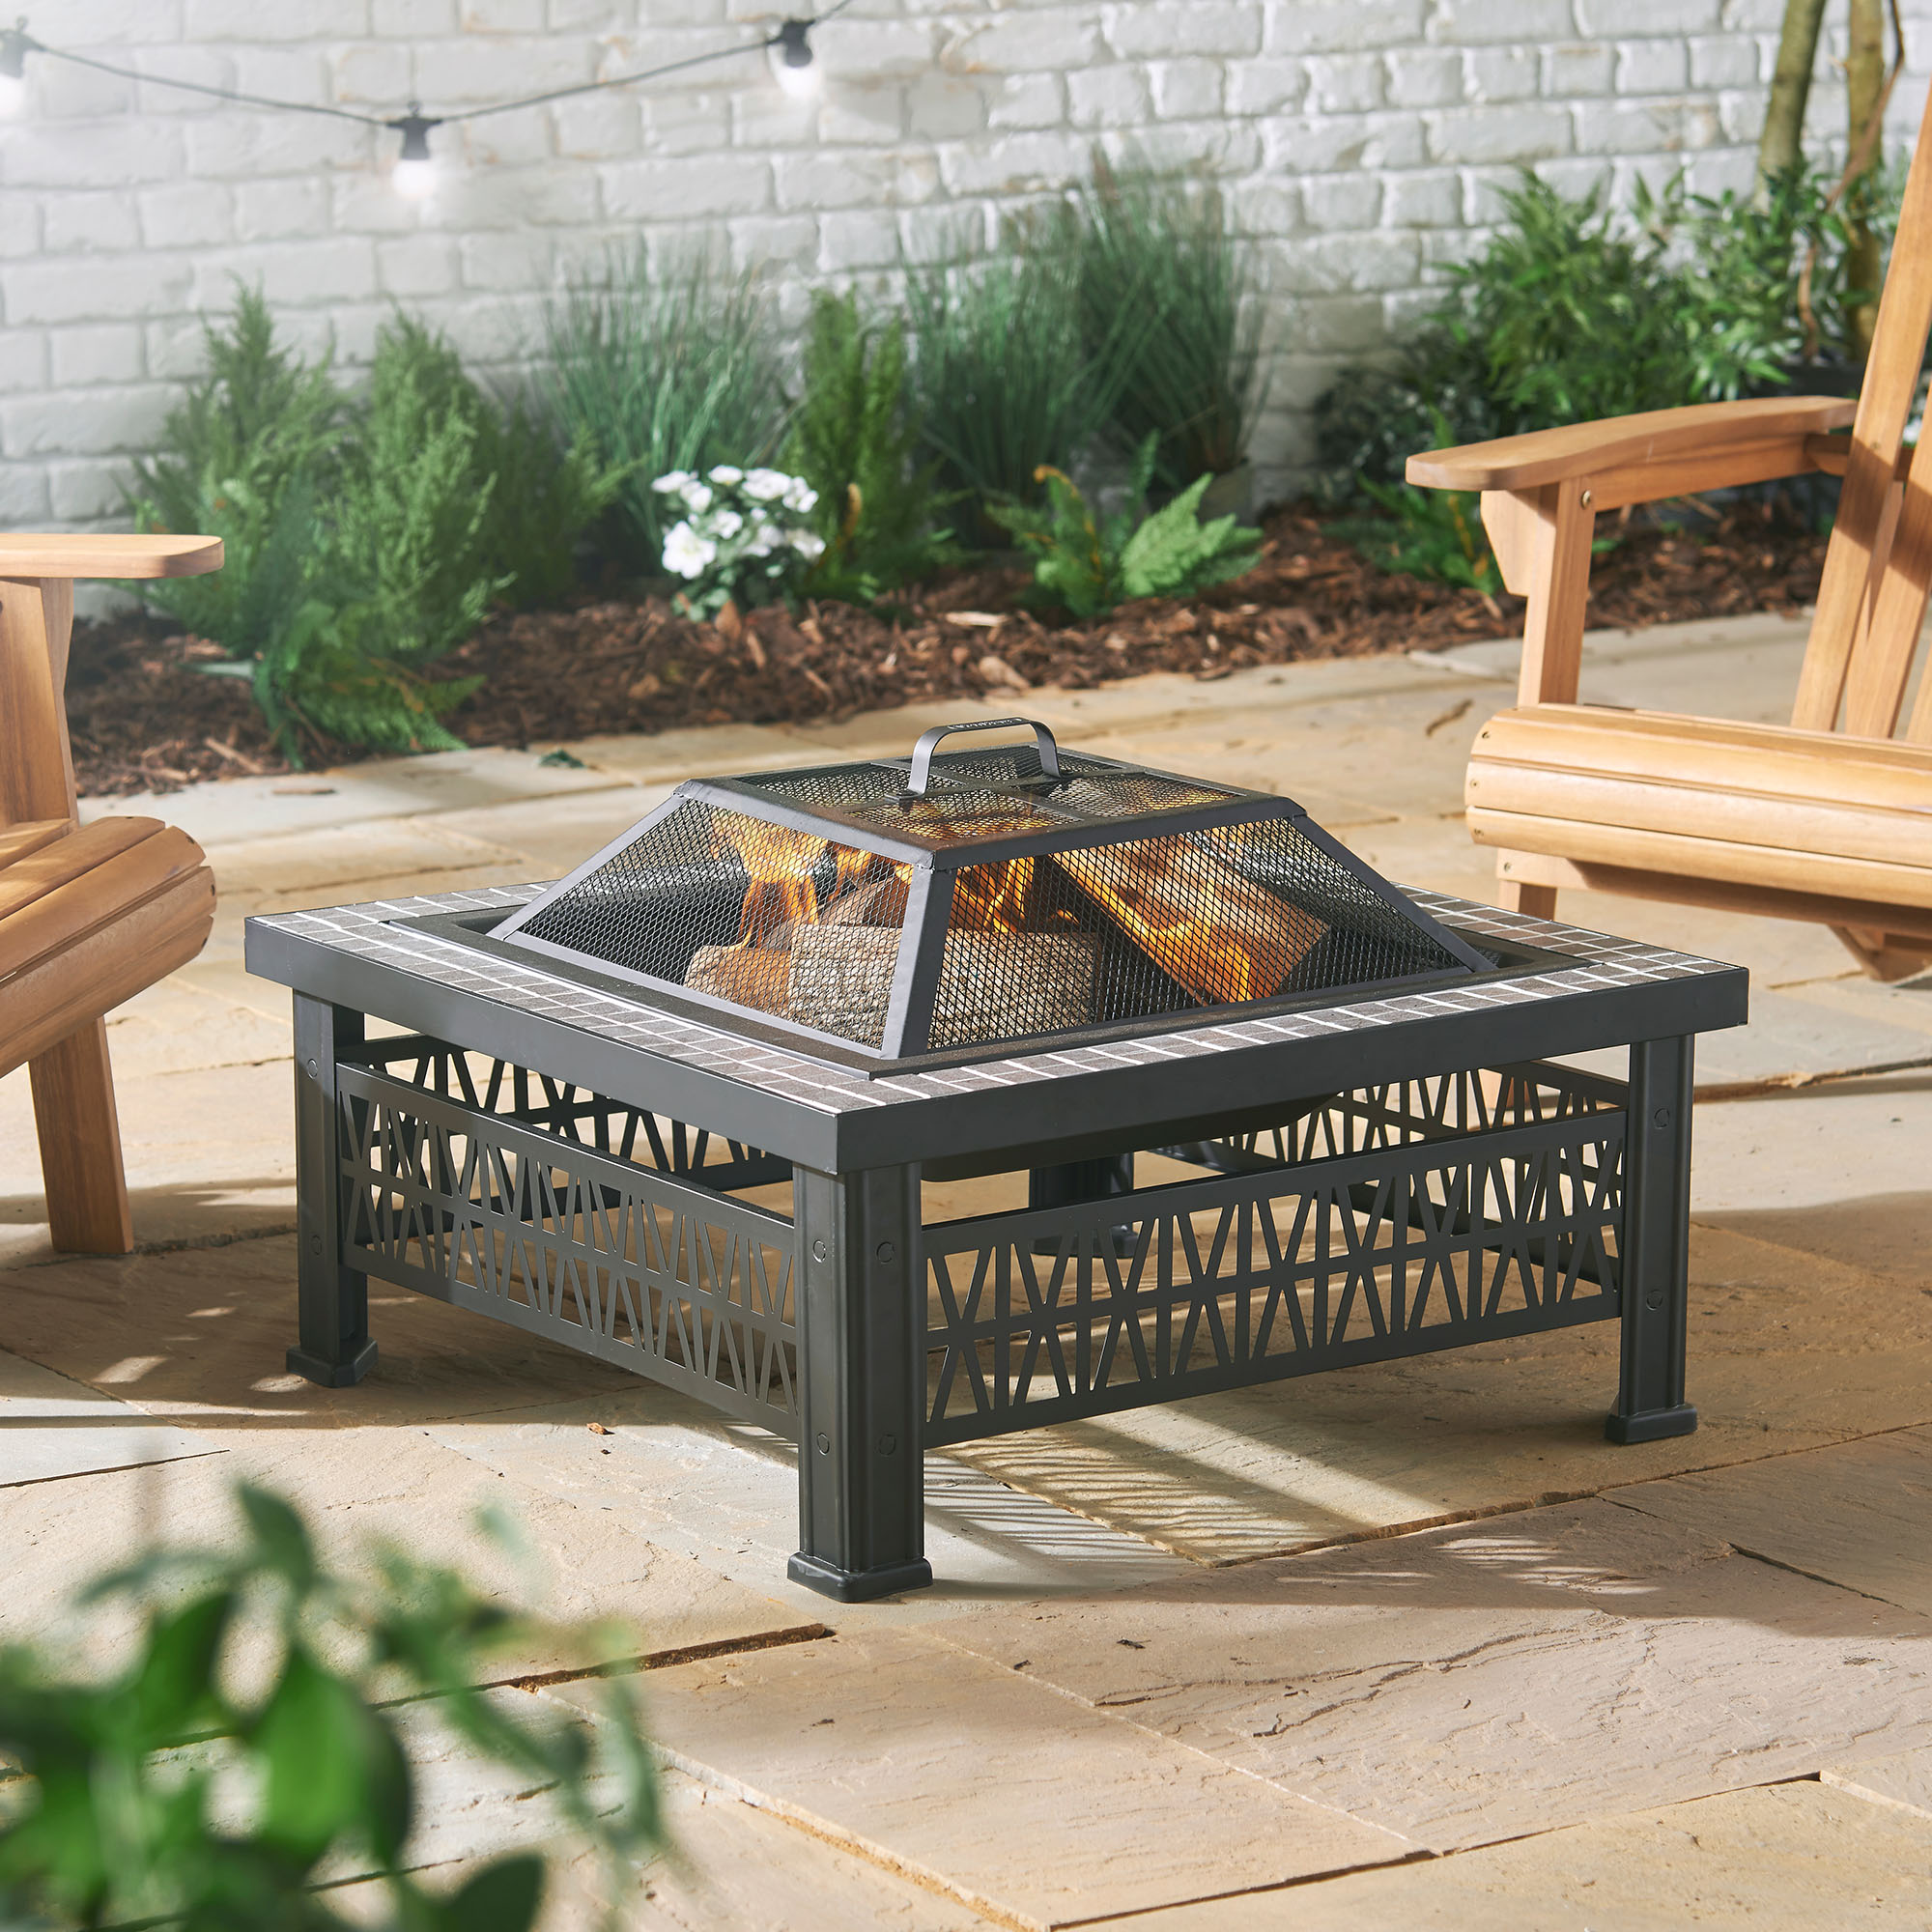 Permalink to Fire Pit Square Bowl Replacement